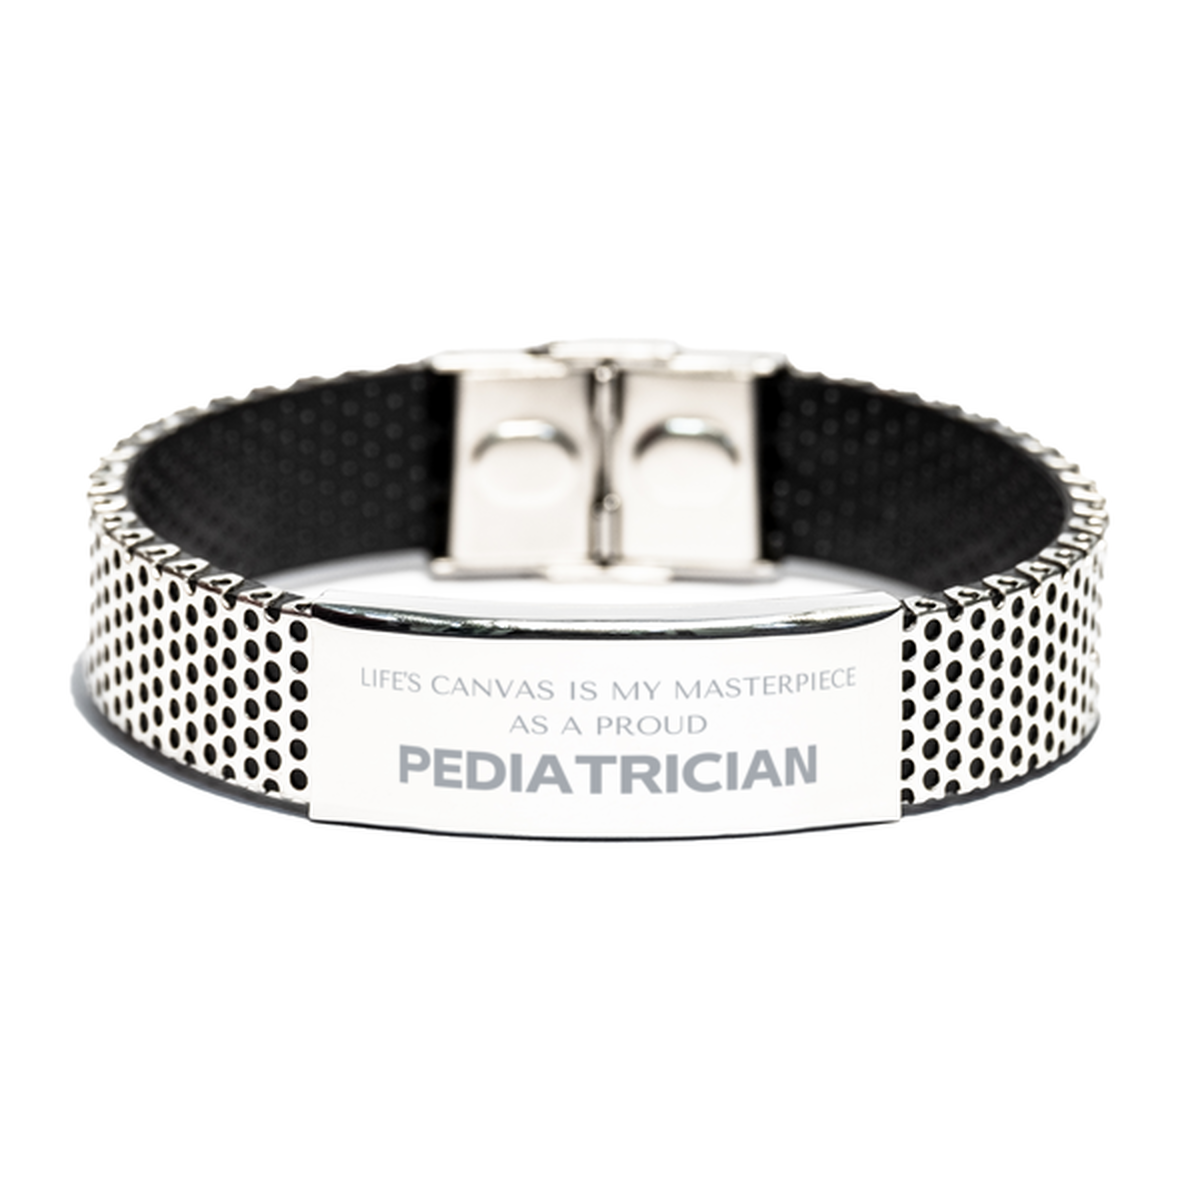 Proud Pediatrician Gifts, Life's canvas is my masterpiece, Epic Birthday Christmas Unique Stainless Steel Bracelet For Pediatrician, Coworkers, Men, Women, Friends